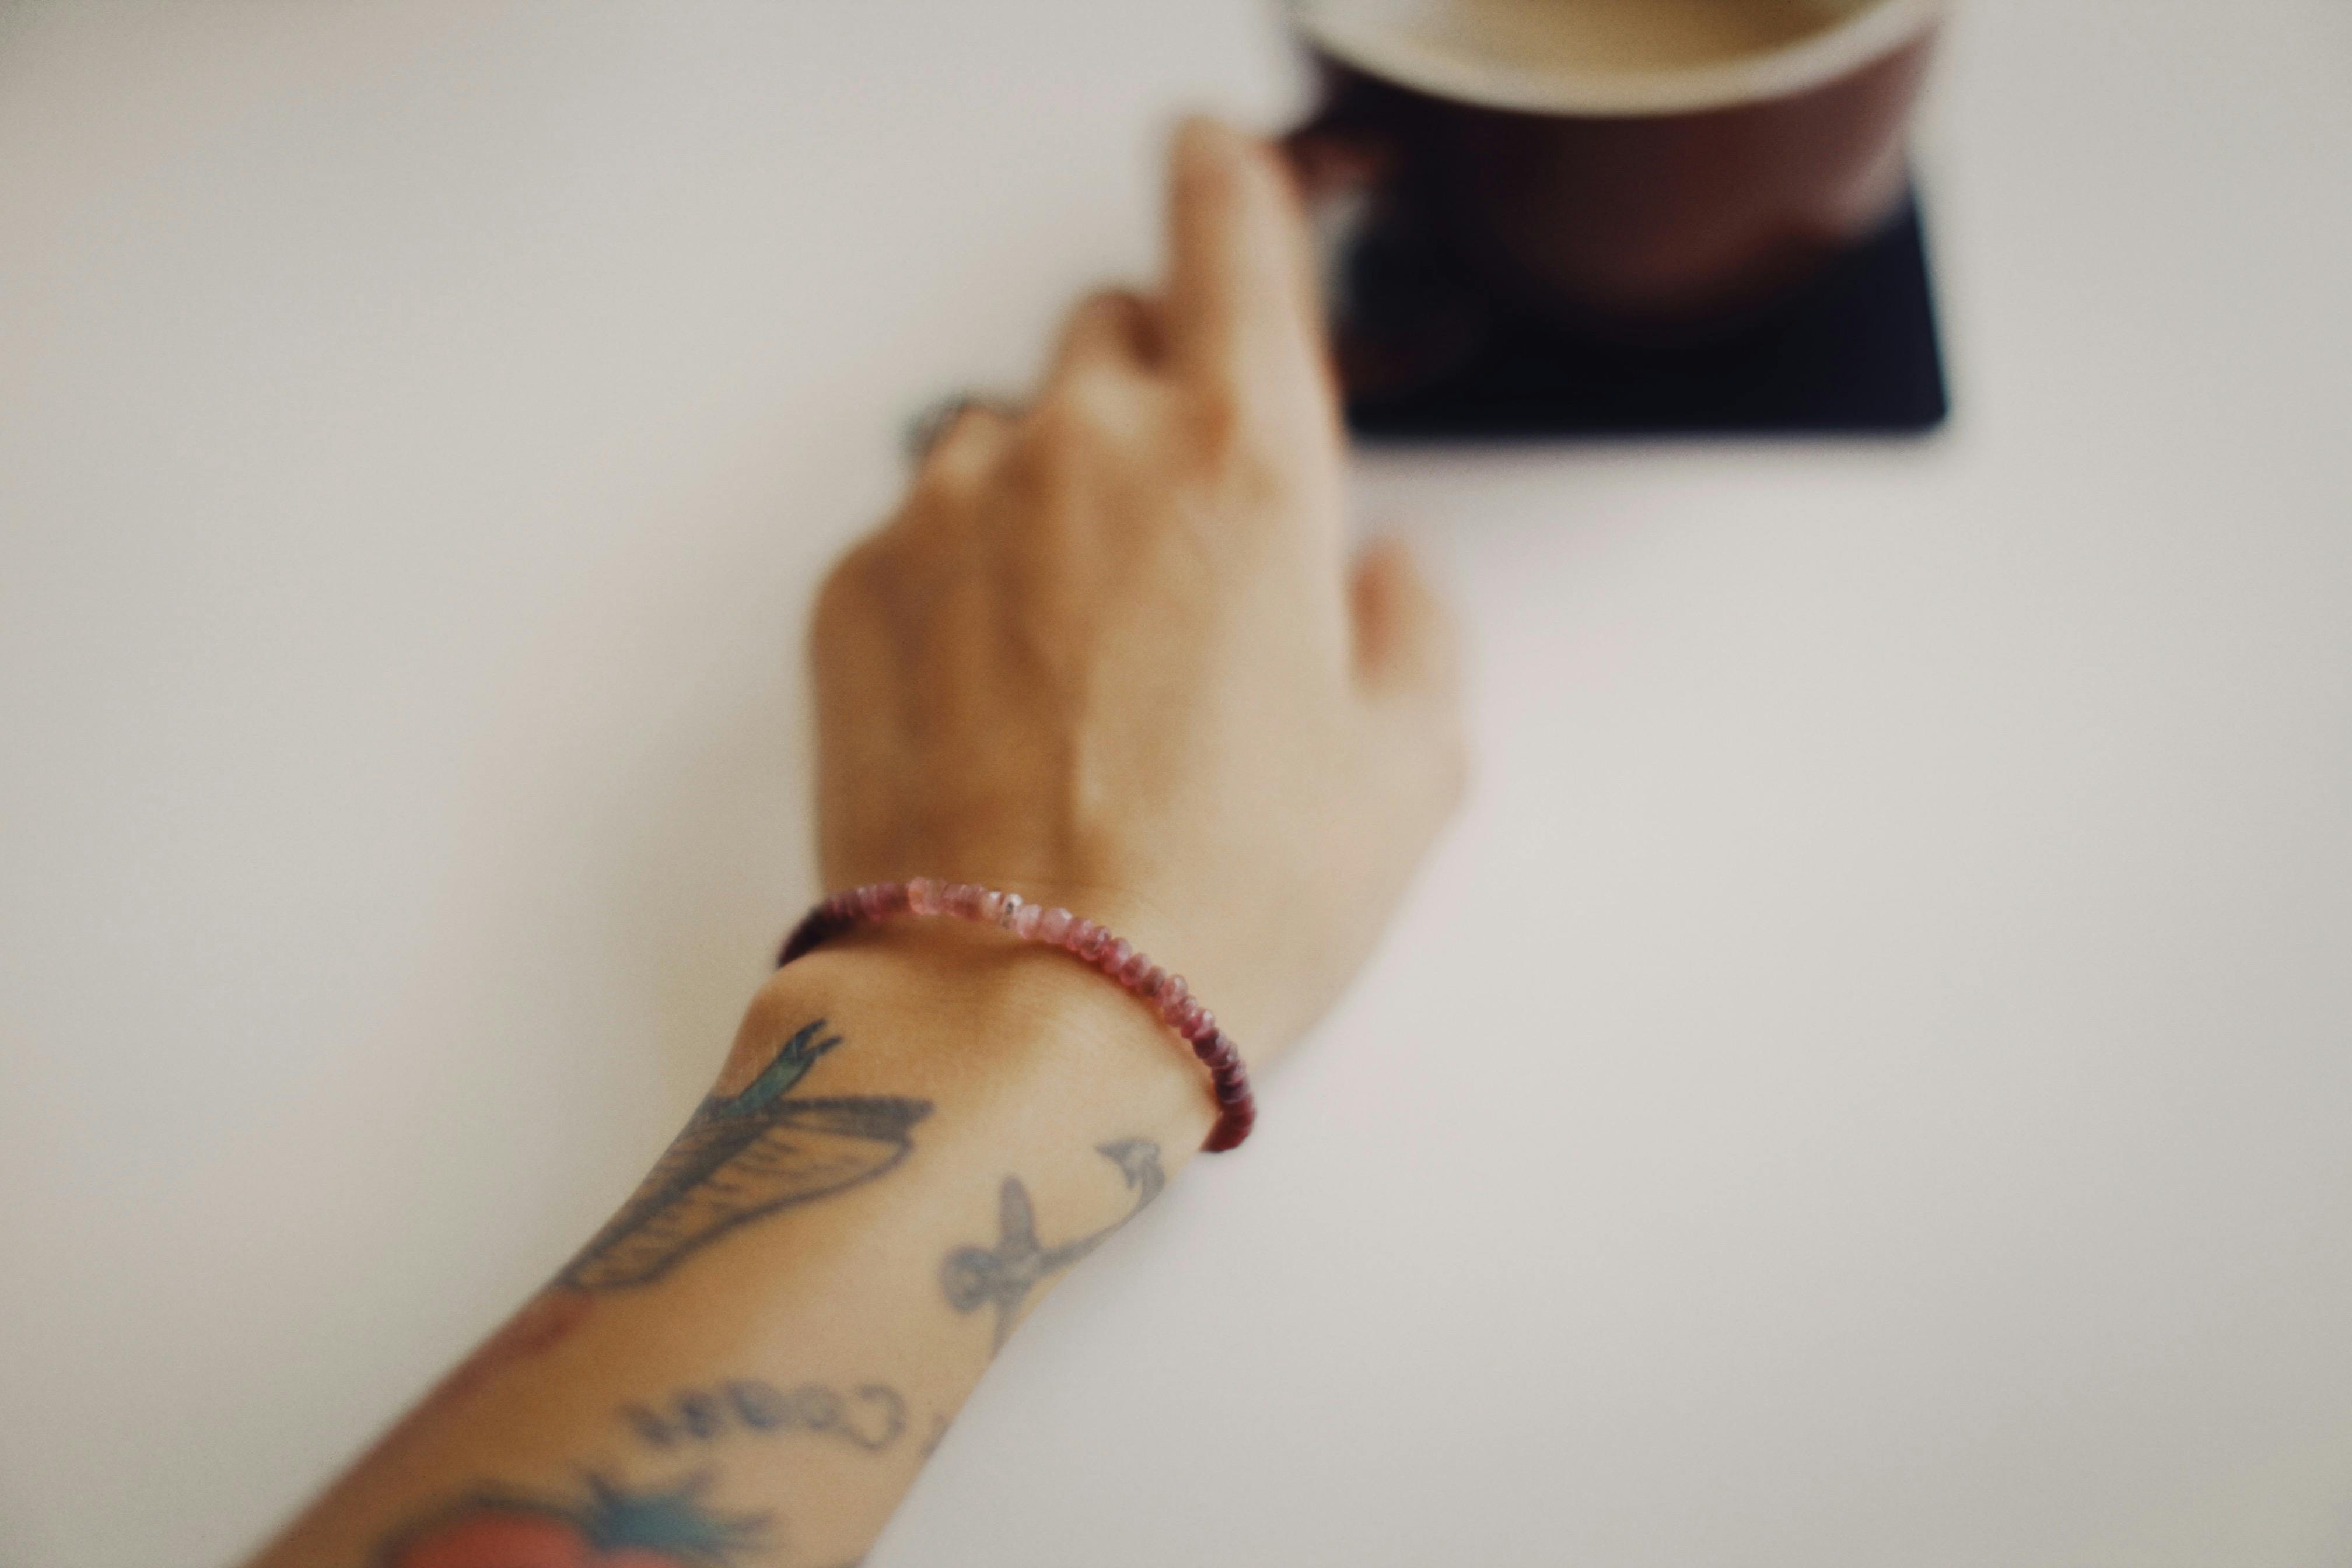 Close-Up Photo of an Arm with Tattoo and Beads Bracelet · Free Stock Photo